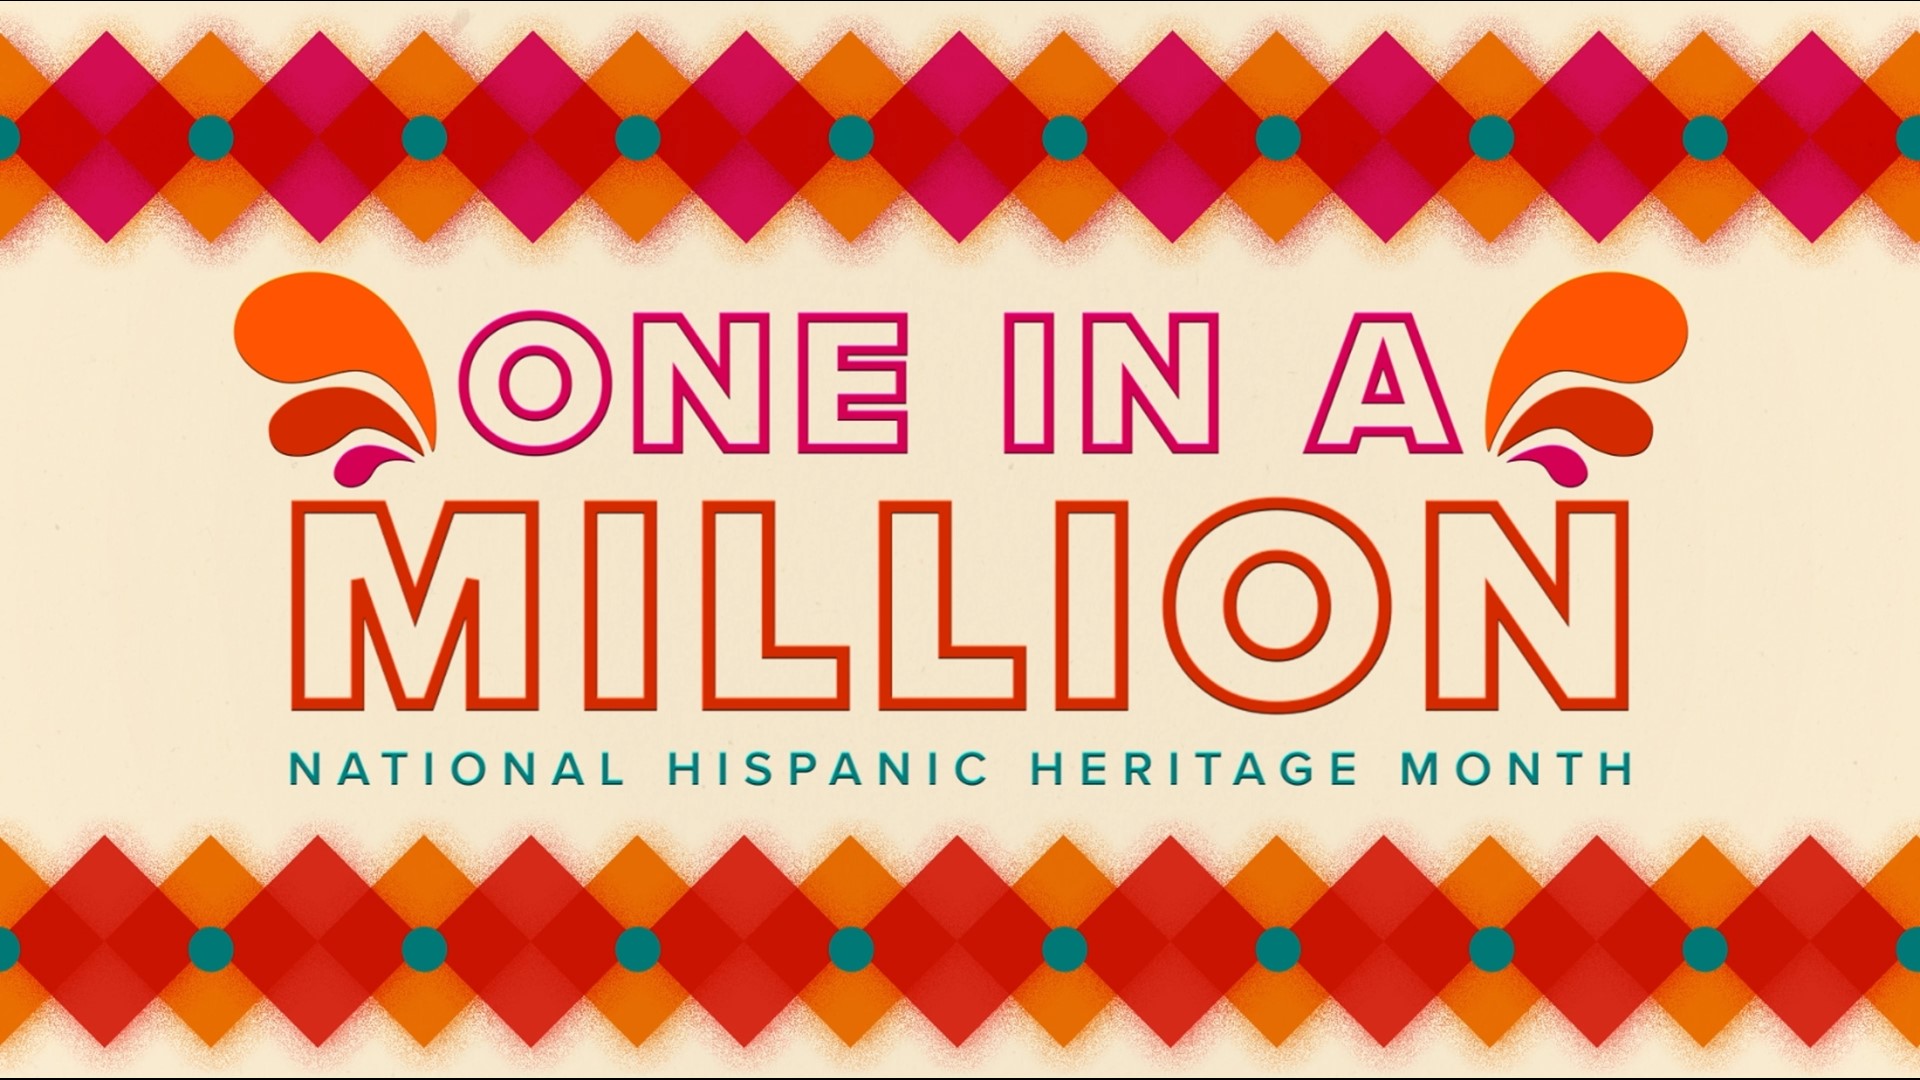 11Alive is celebrating Hispanic Heritage Month by highlighting cultural influences through leadership, food, music, art and sports.